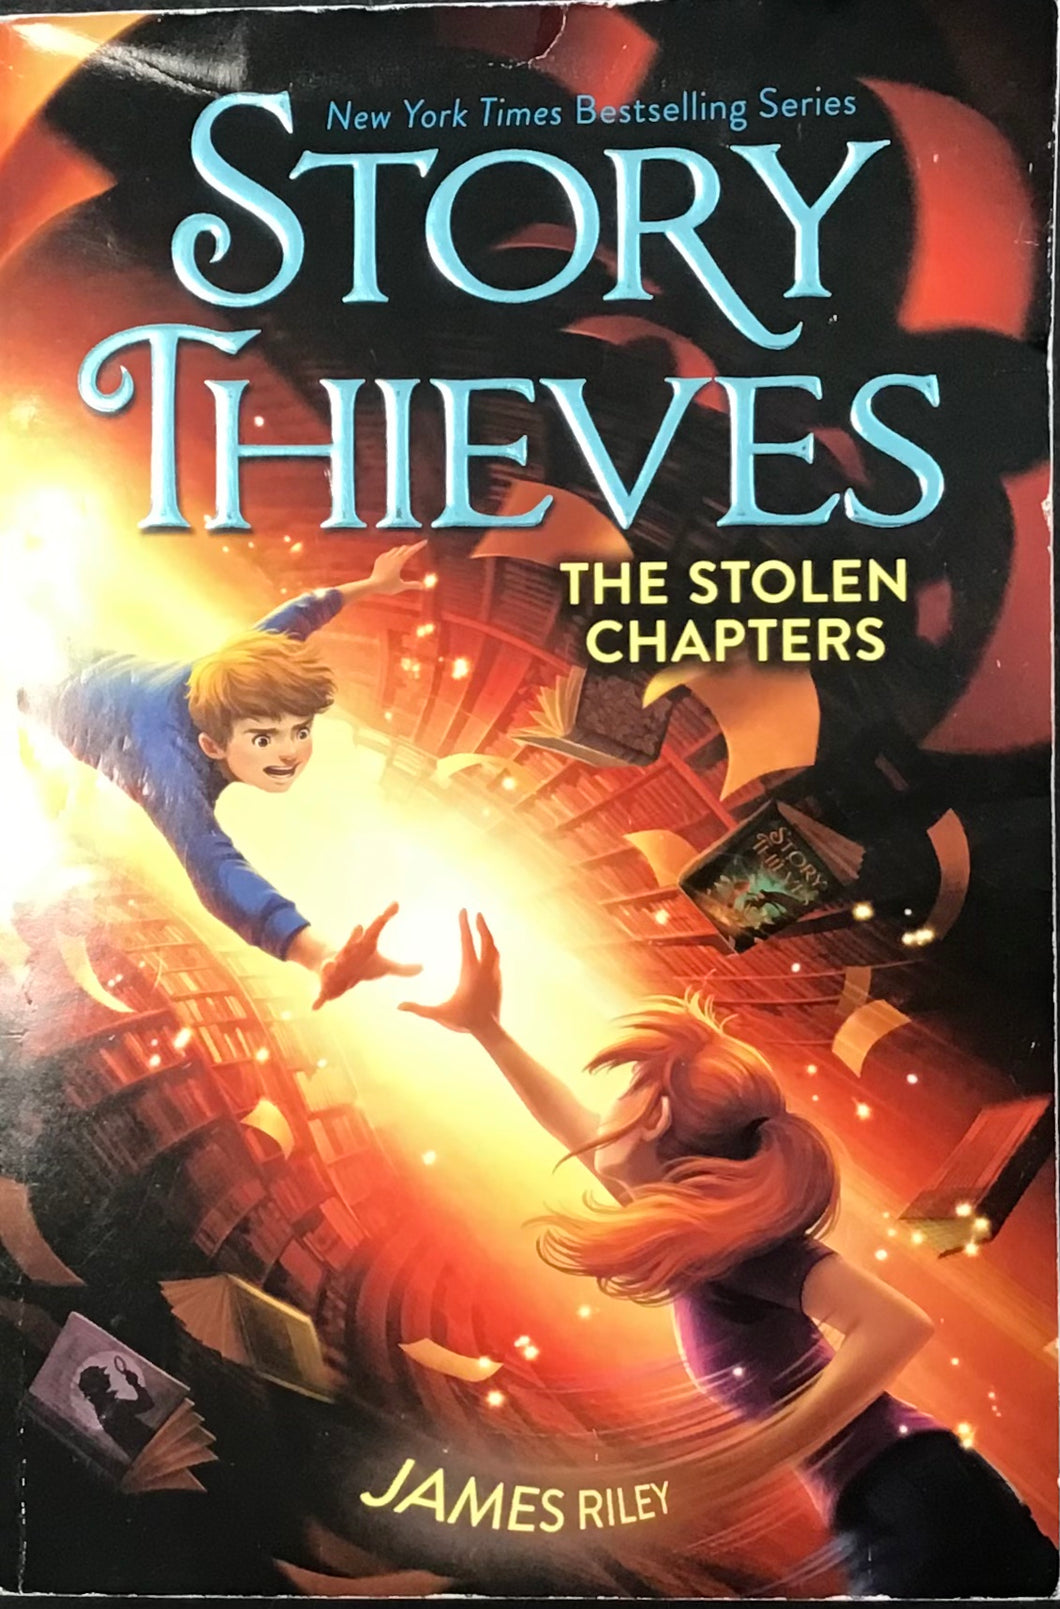 The Stolen Chapters, James Riley